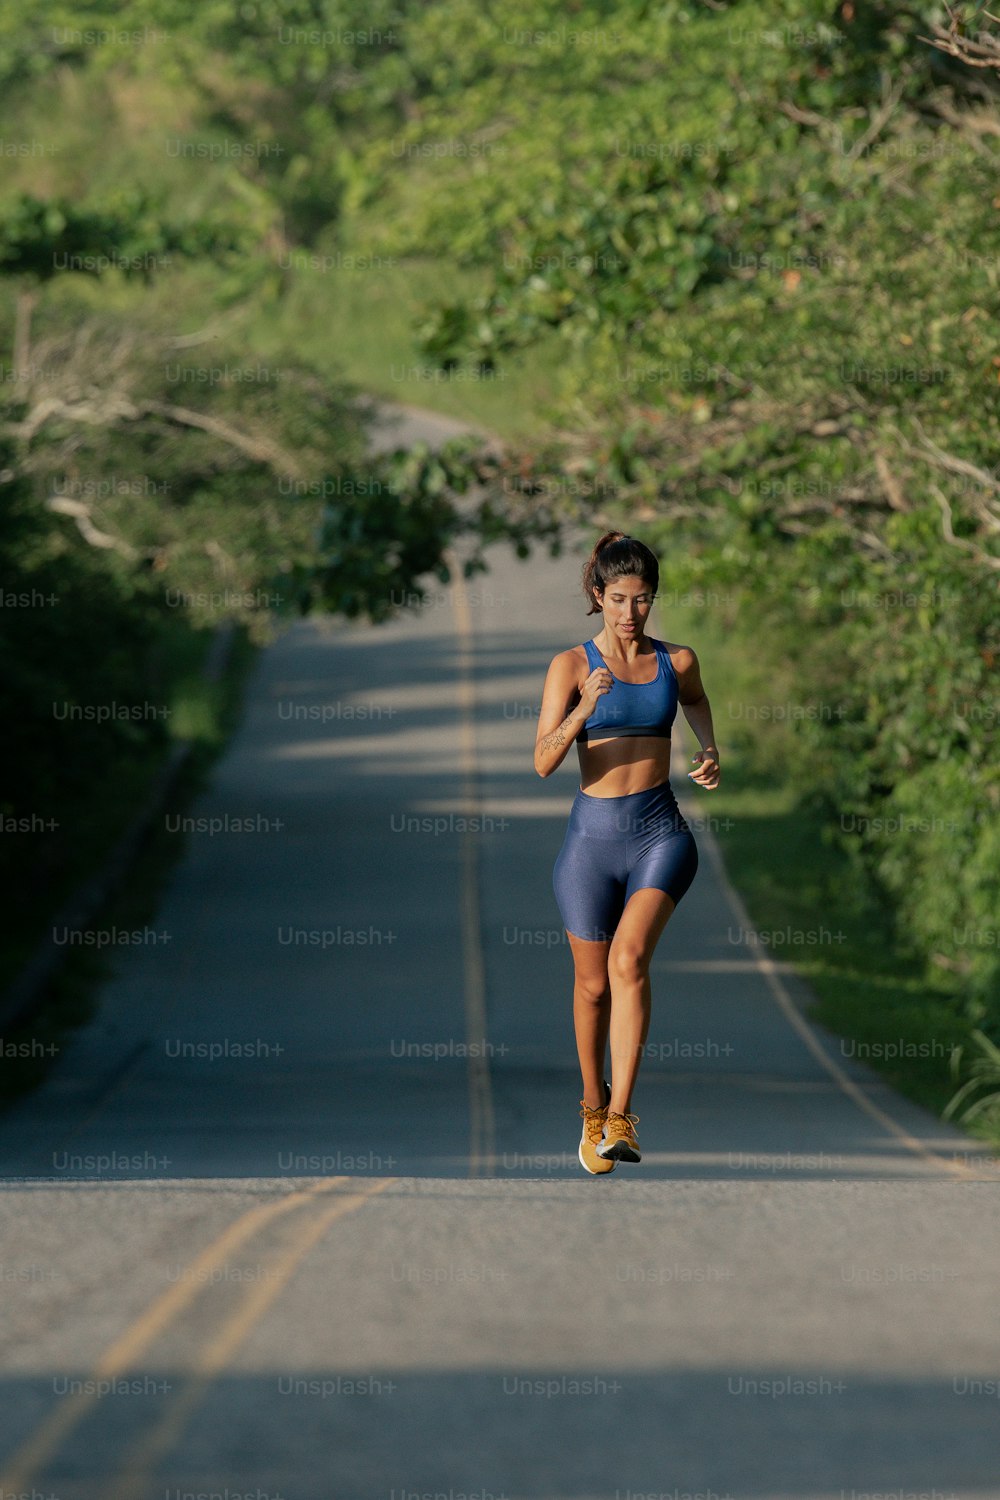 a woman running down a road with trees in the background